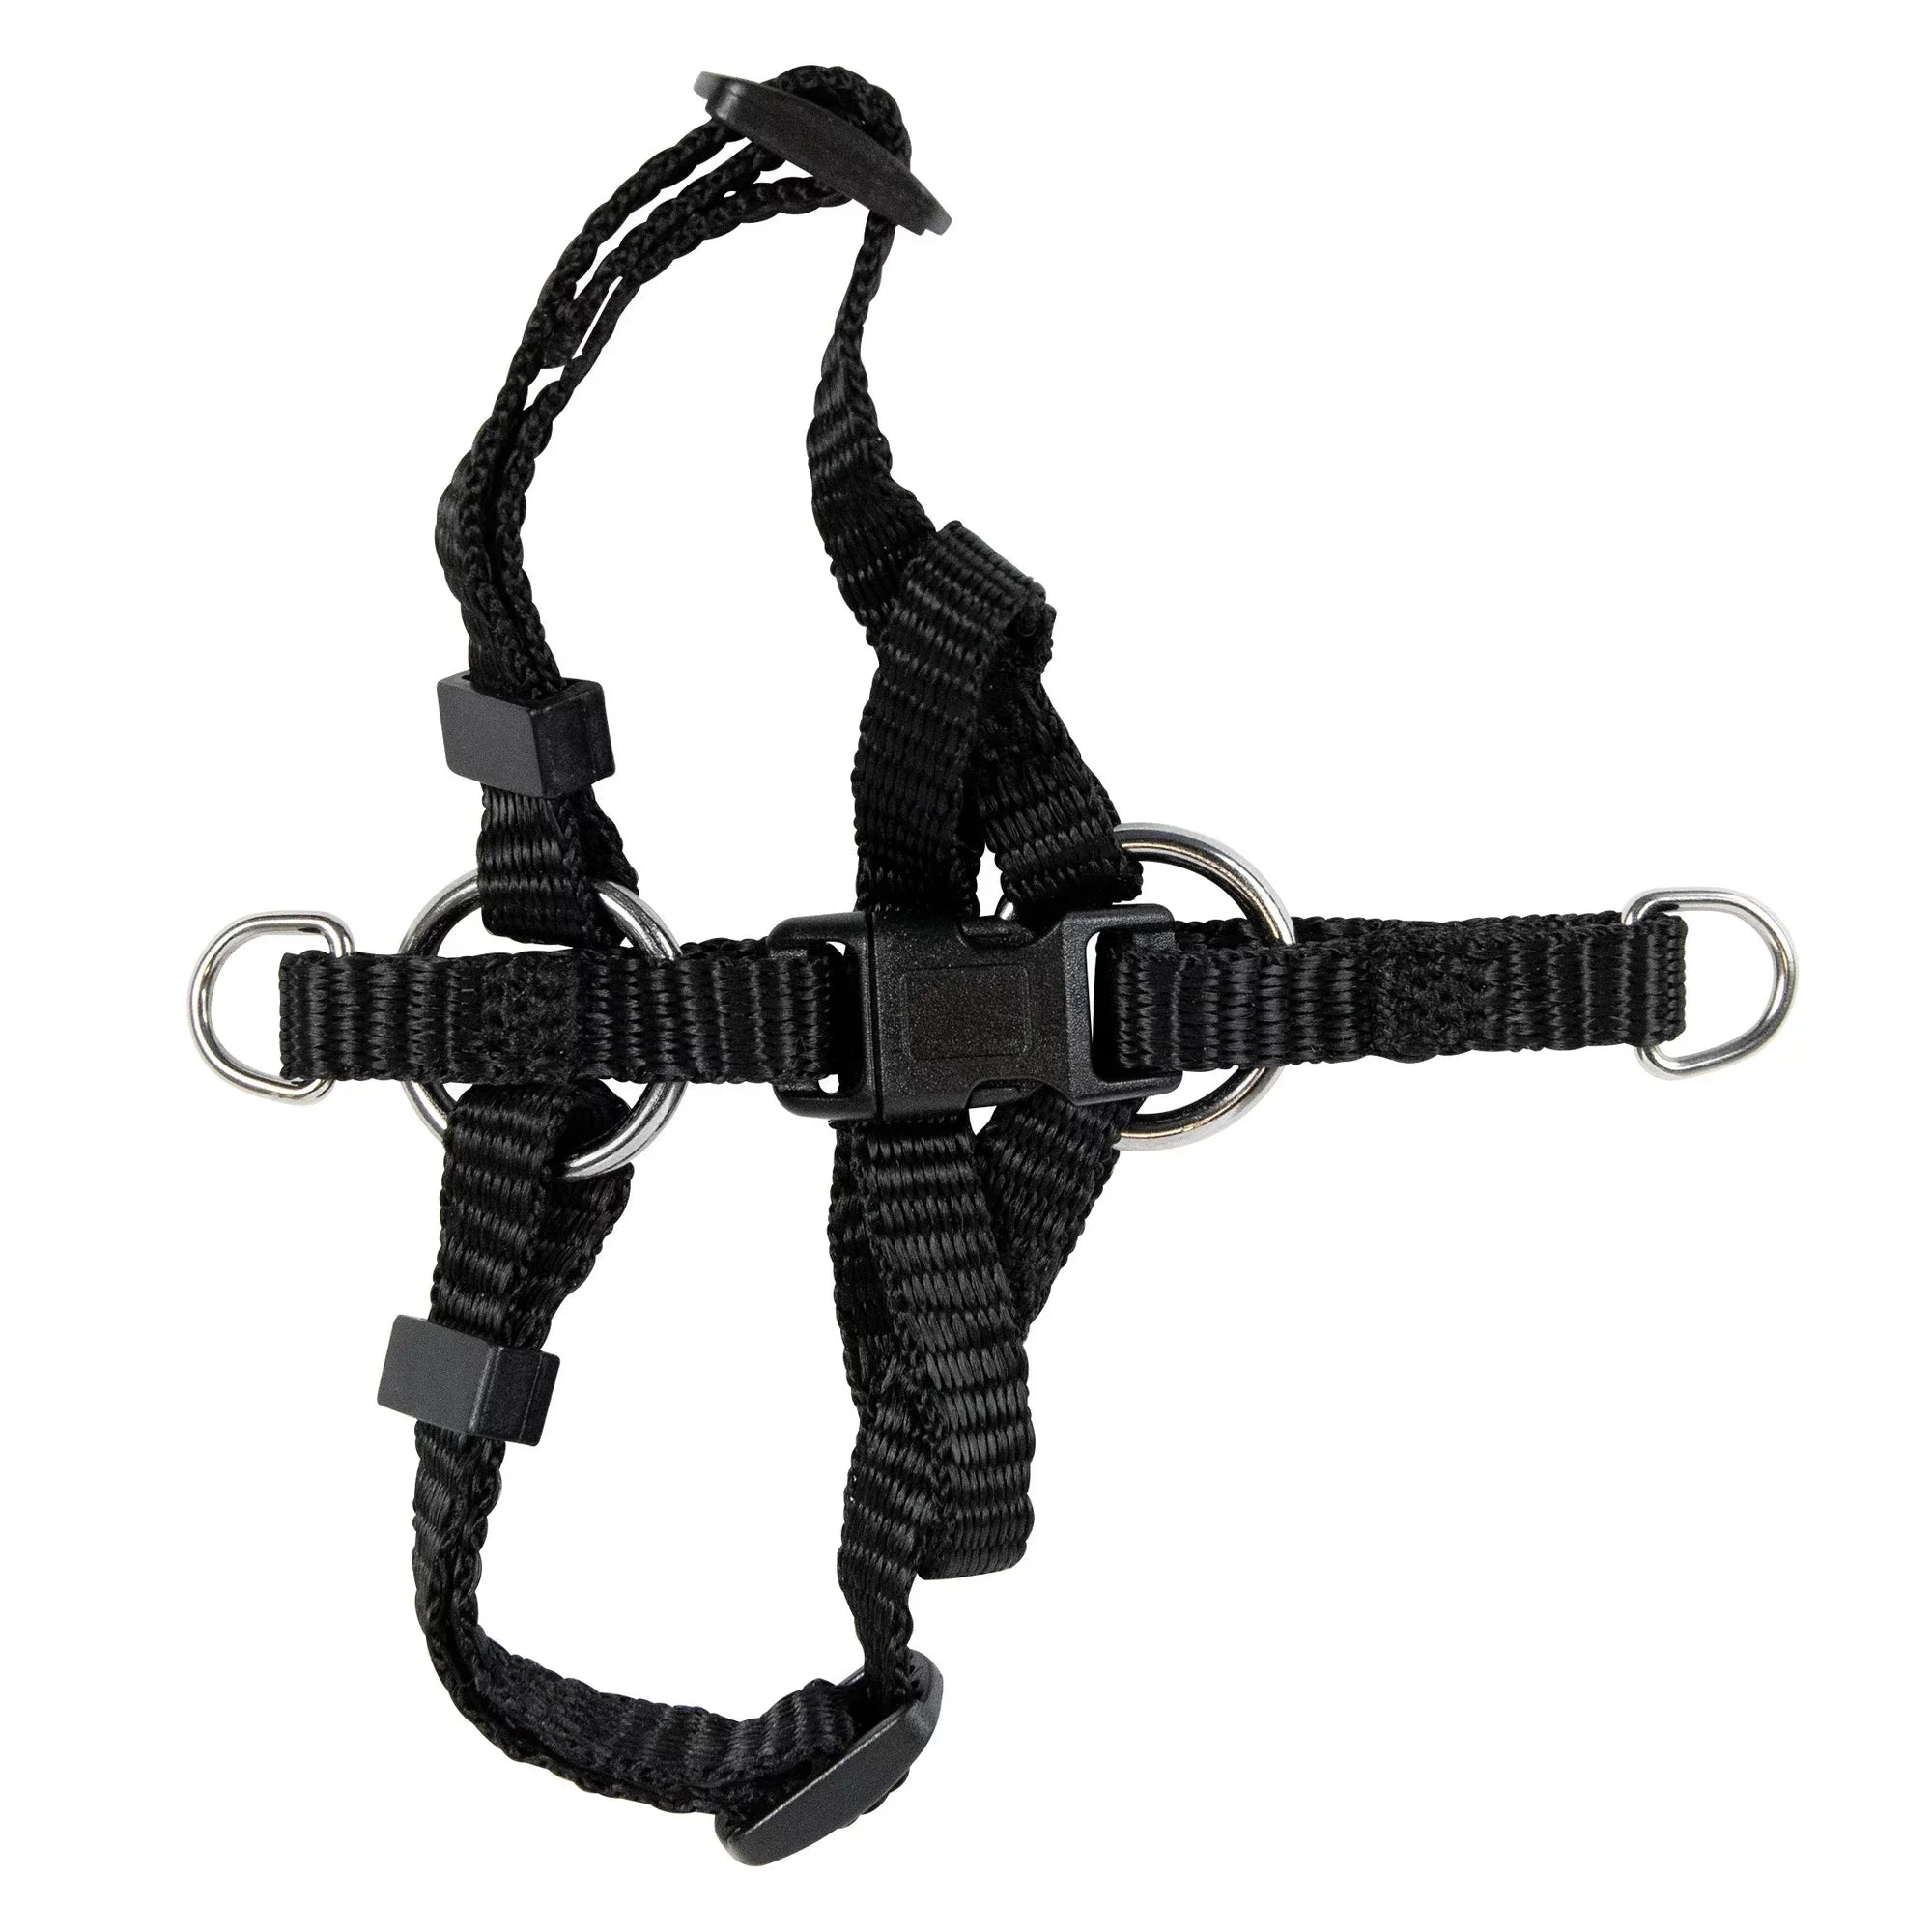 Wholesale prices with free shipping all over United States Pet Champion Basic Step-in Cat Harness - Steven Deals